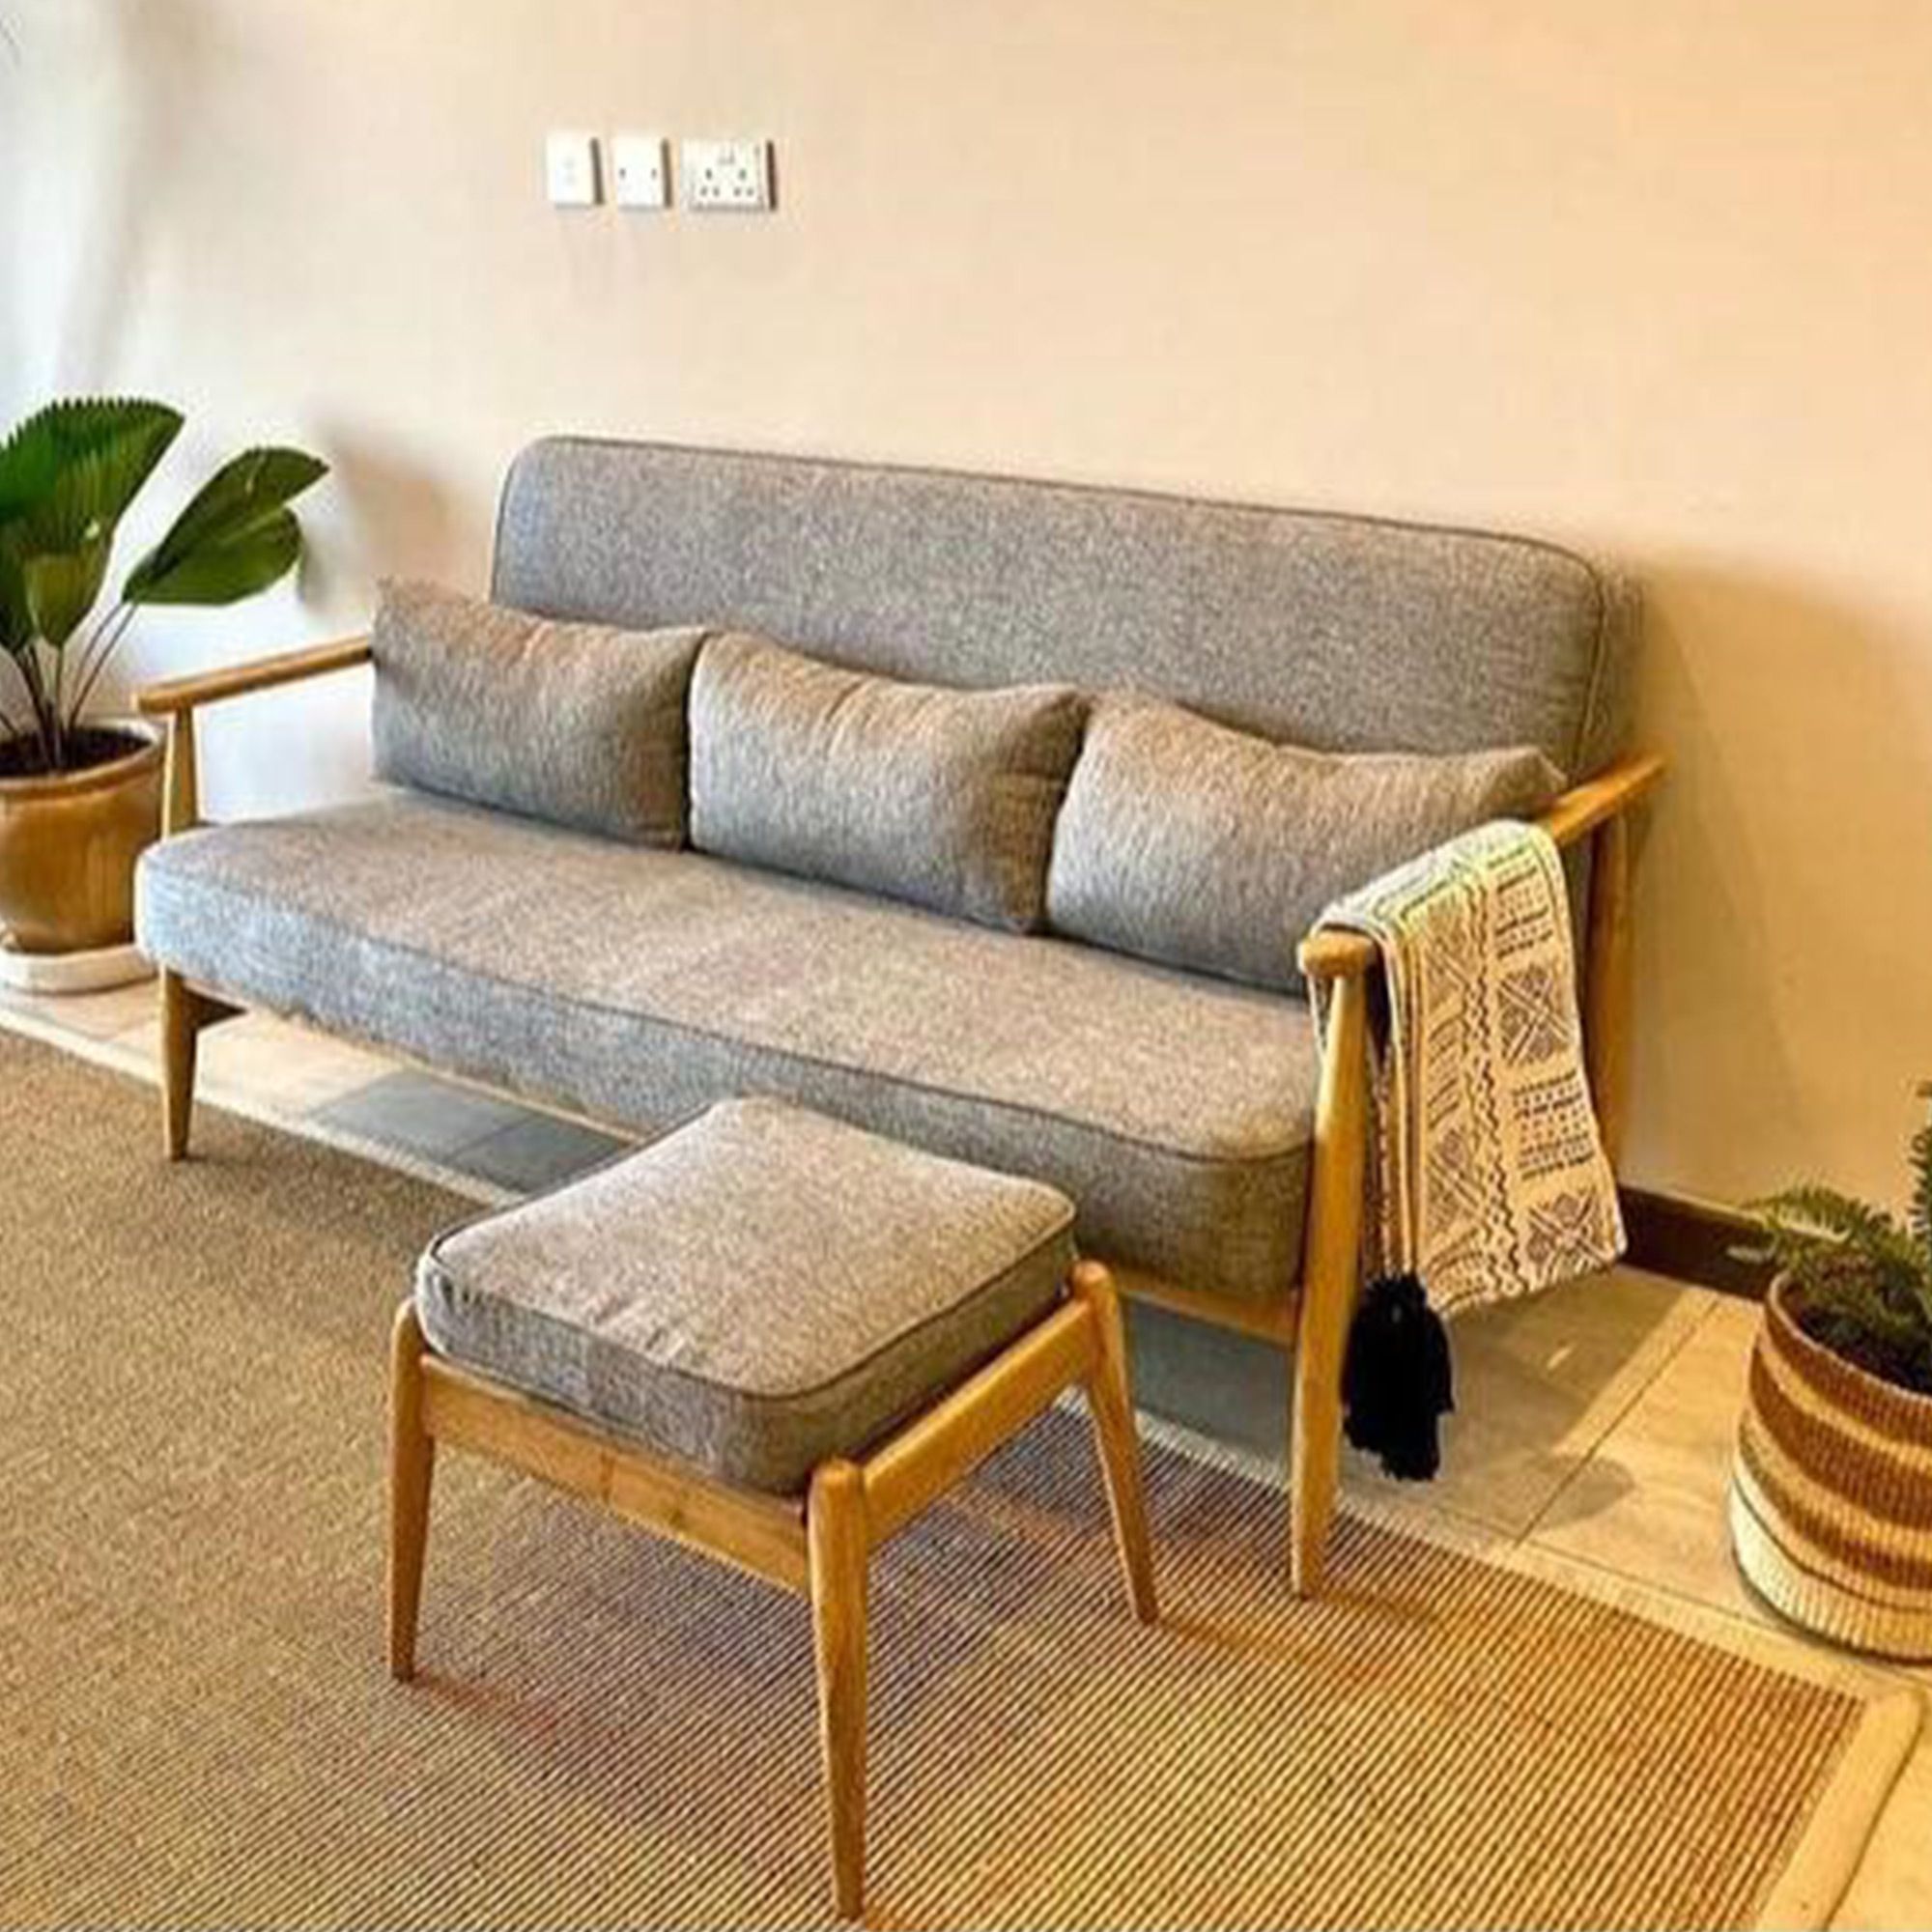 3 Seater Mid Century Sofa – Workshop | Nairobi In Mid Century 3 Seat Couches (View 3 of 15)